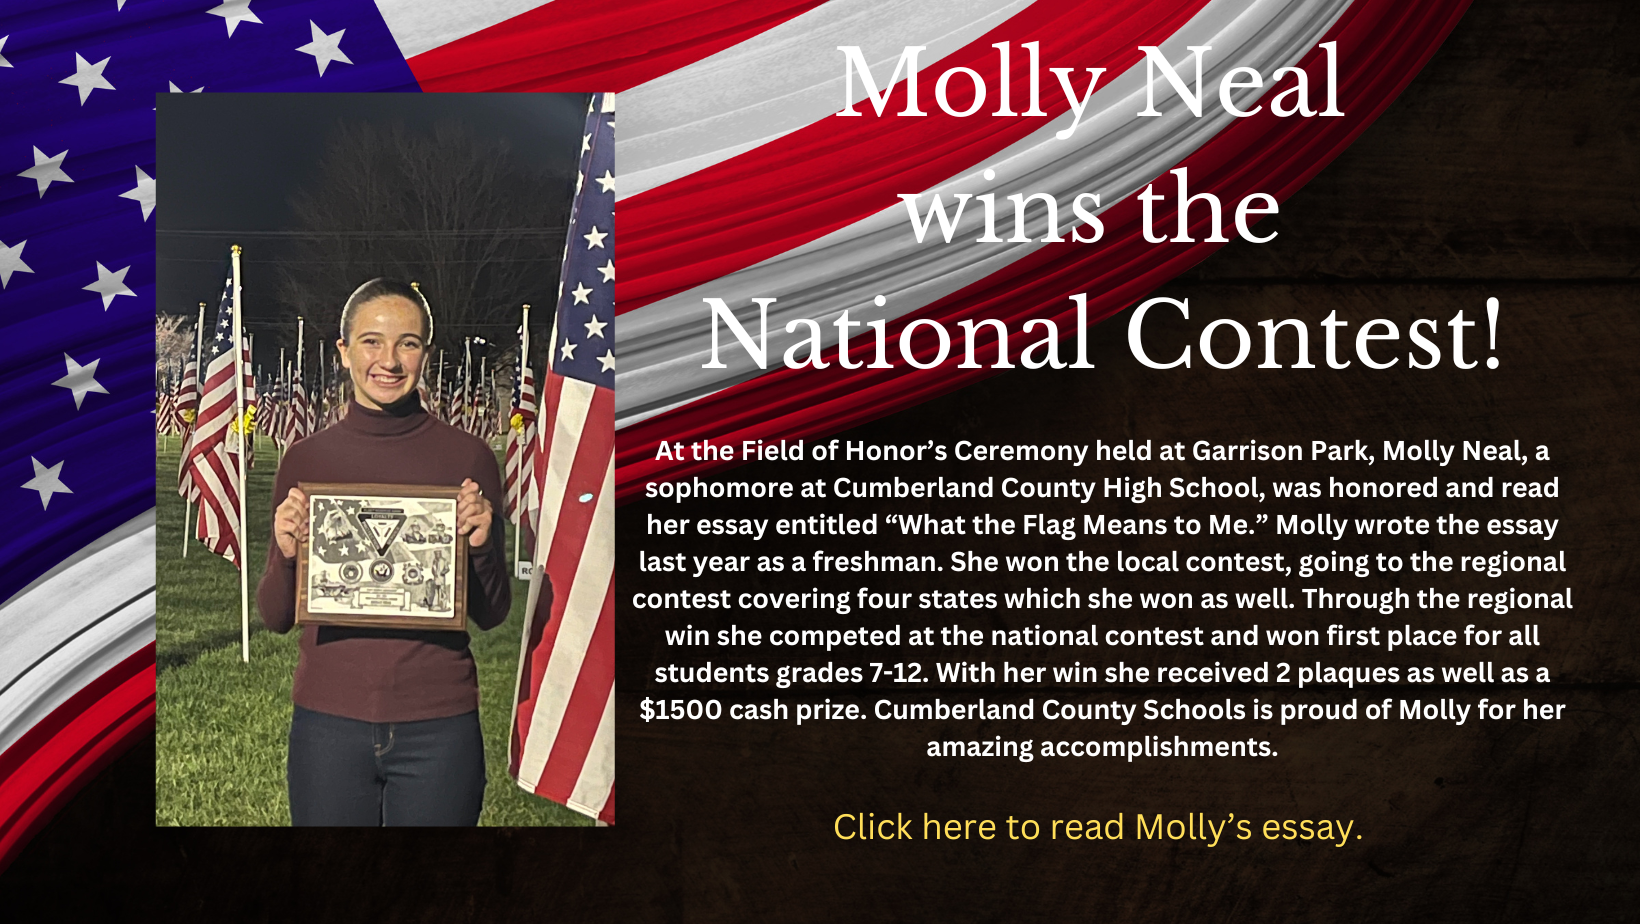 Molly Neal image and information 